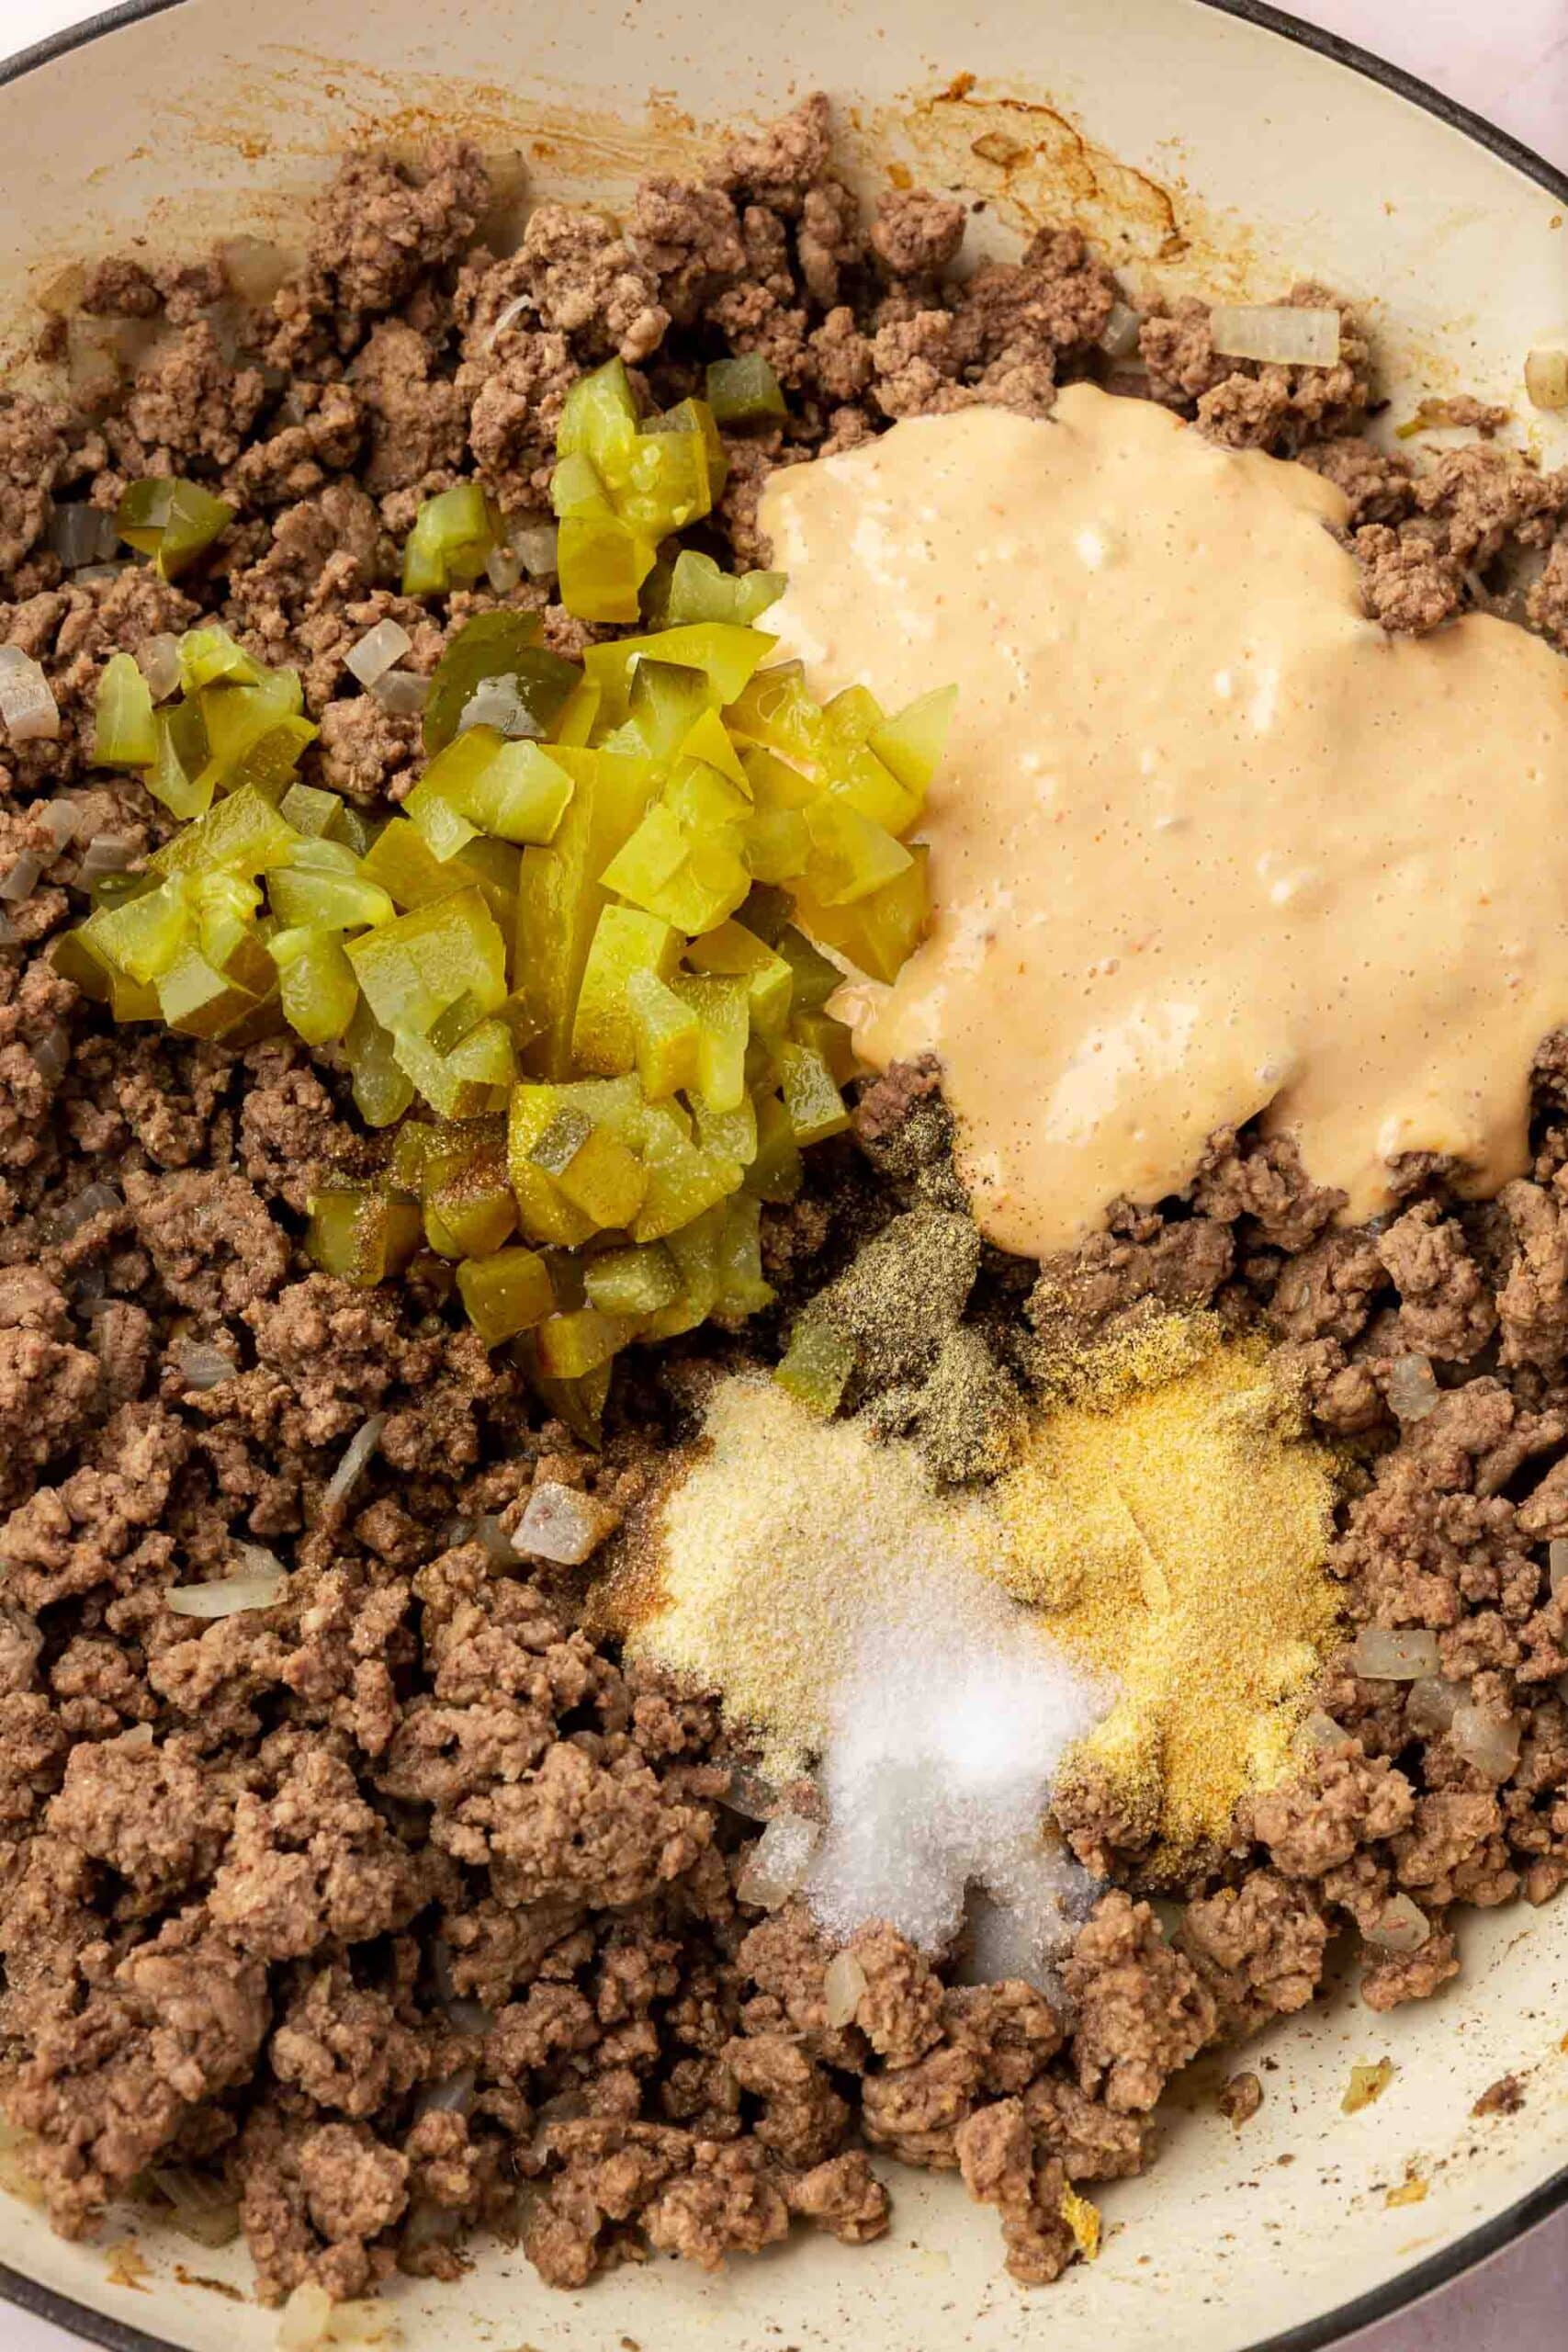 Cooked ground beef in a braising pan topped with diced pickles, garlic powder, salt, onion powder and thousand island dressing before mixing together.